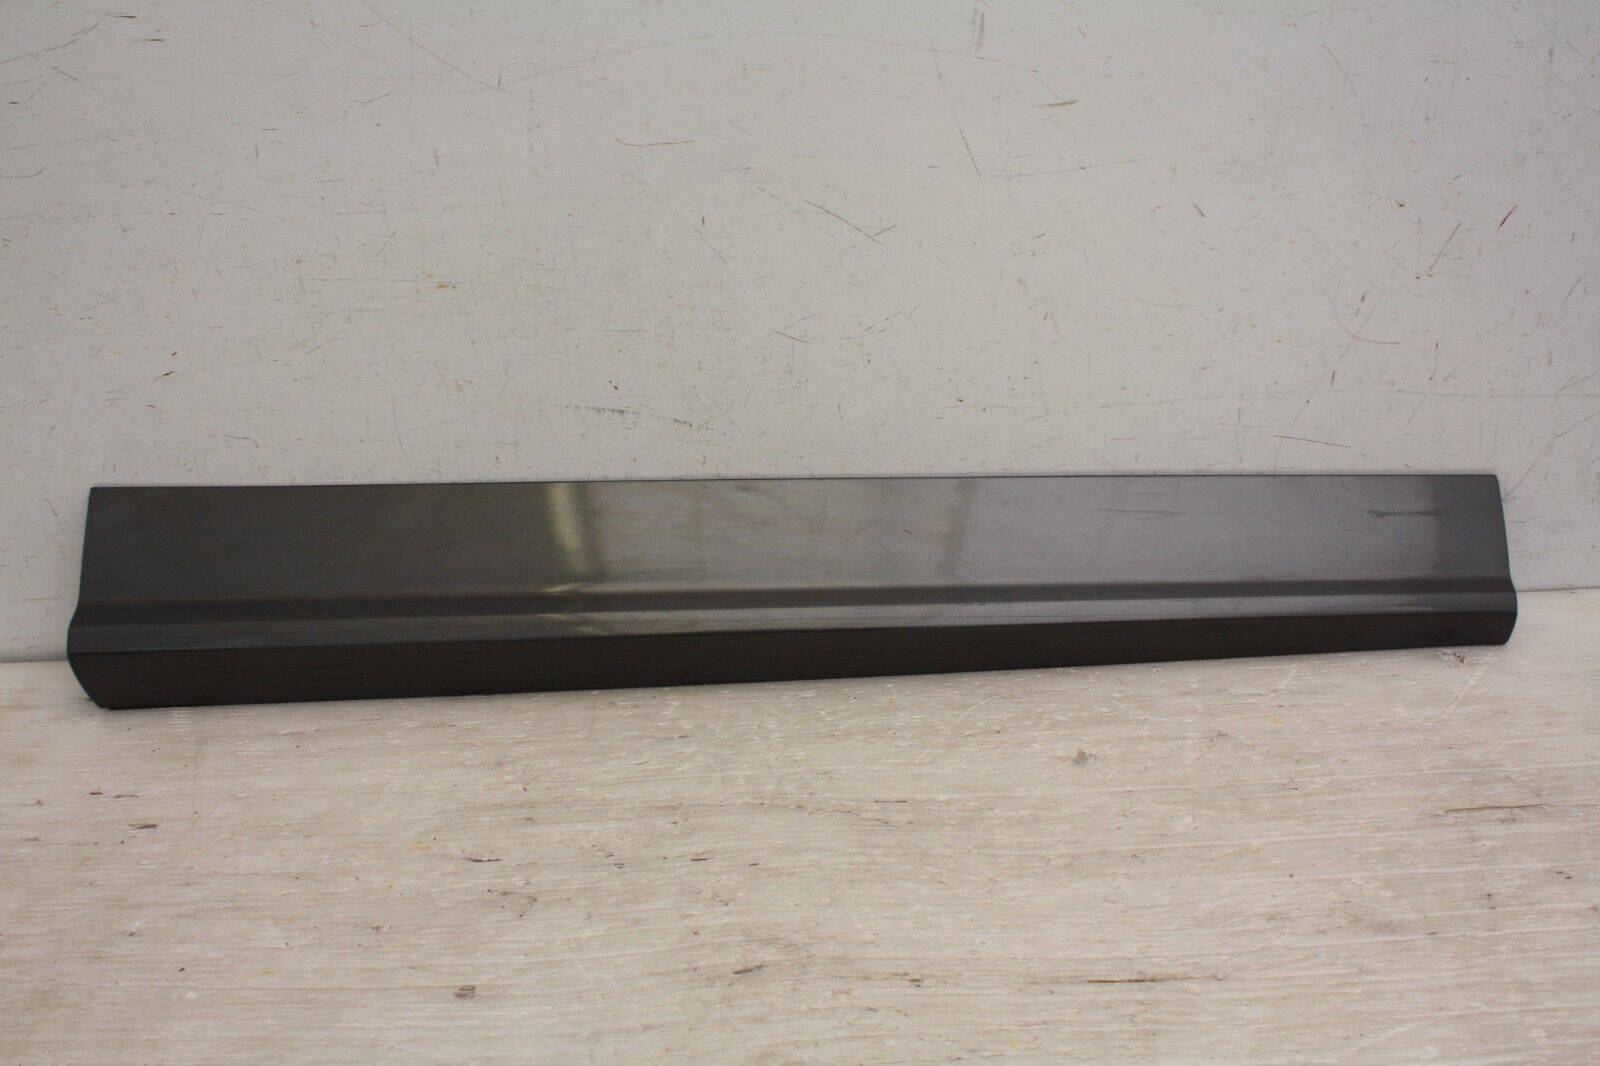 Audi Q5 S Line Front Right Door Moulding 2017 to 2020 80A853960B Genuine 175955541130